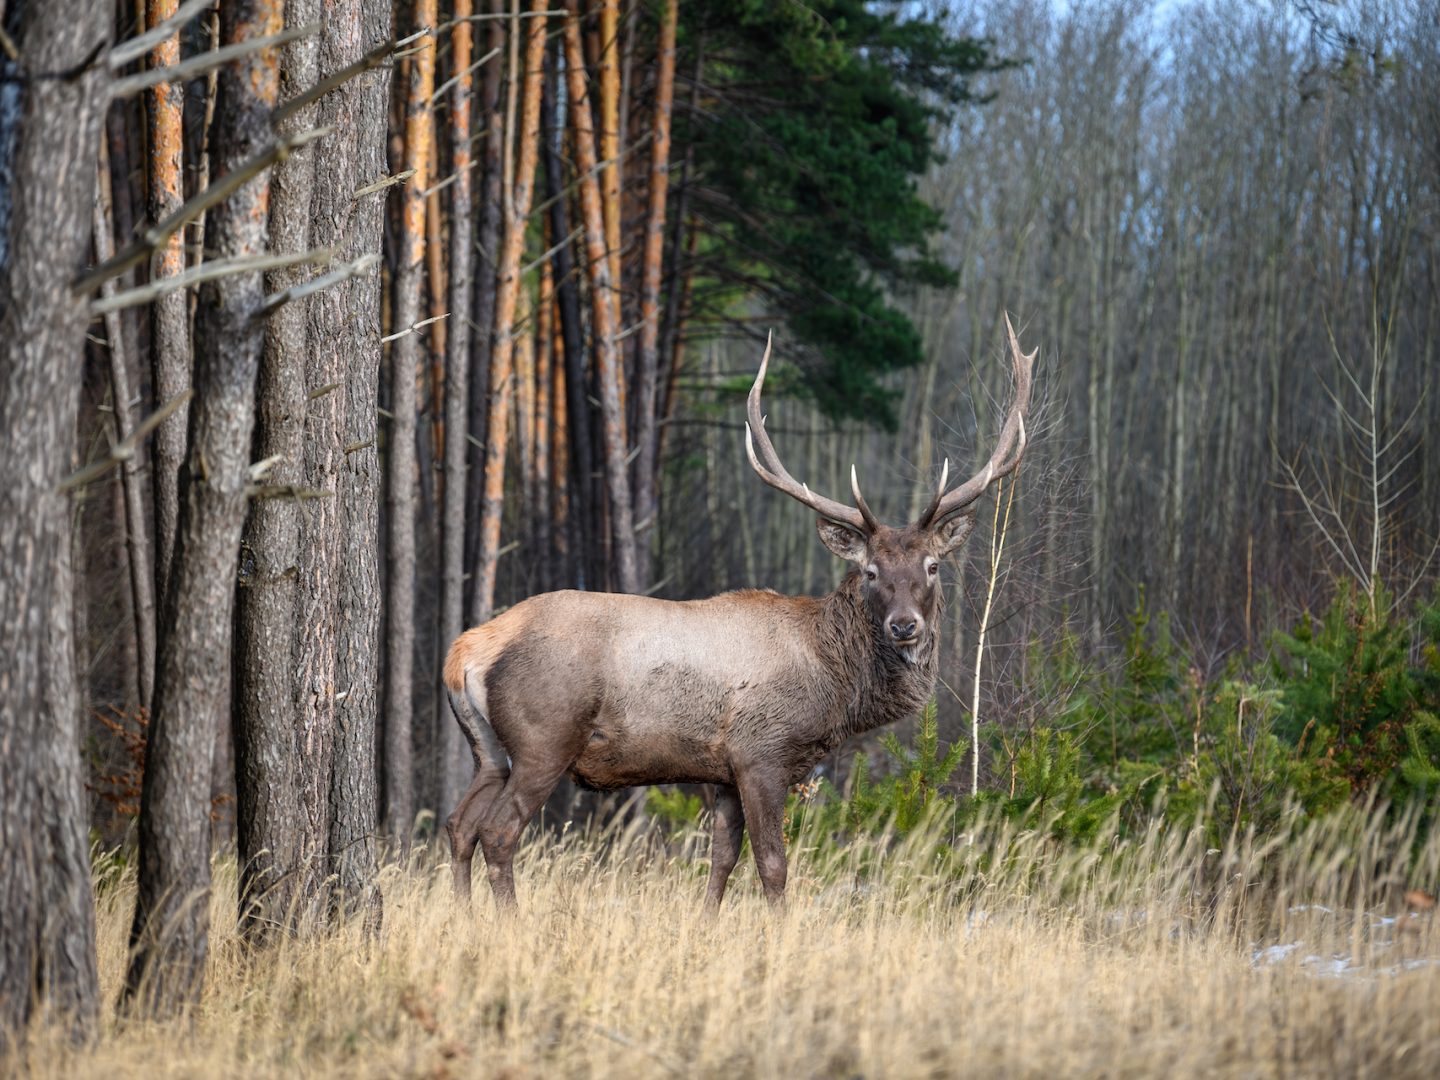 Adult male deer on a background of forest. Animal in natural habitat. Wildlife scene